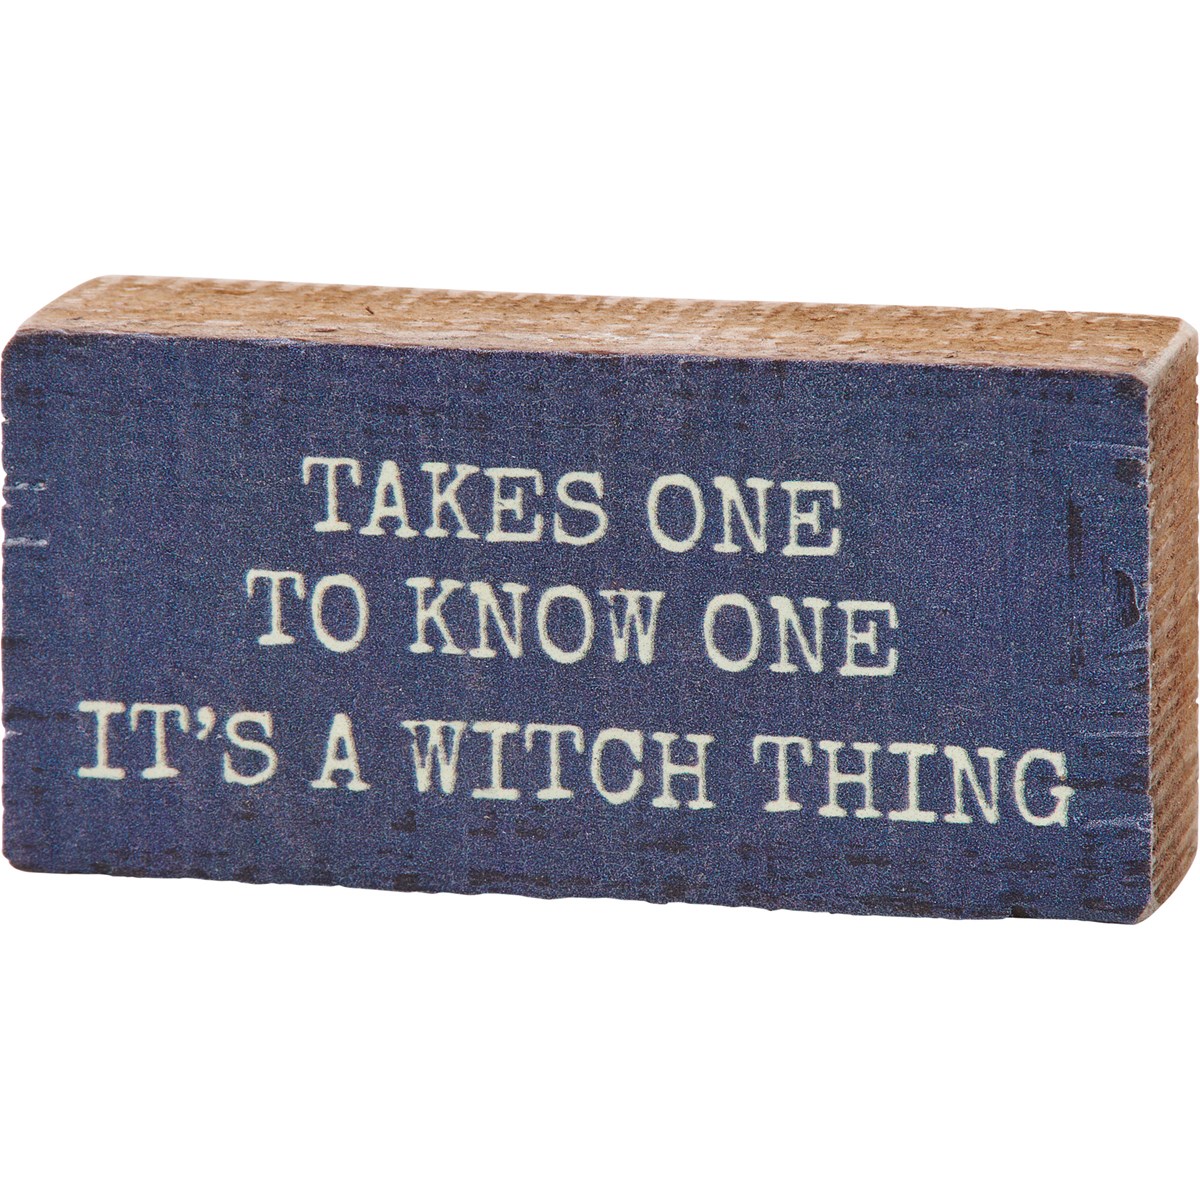 It's A Witch Thing Block Sign - Wood